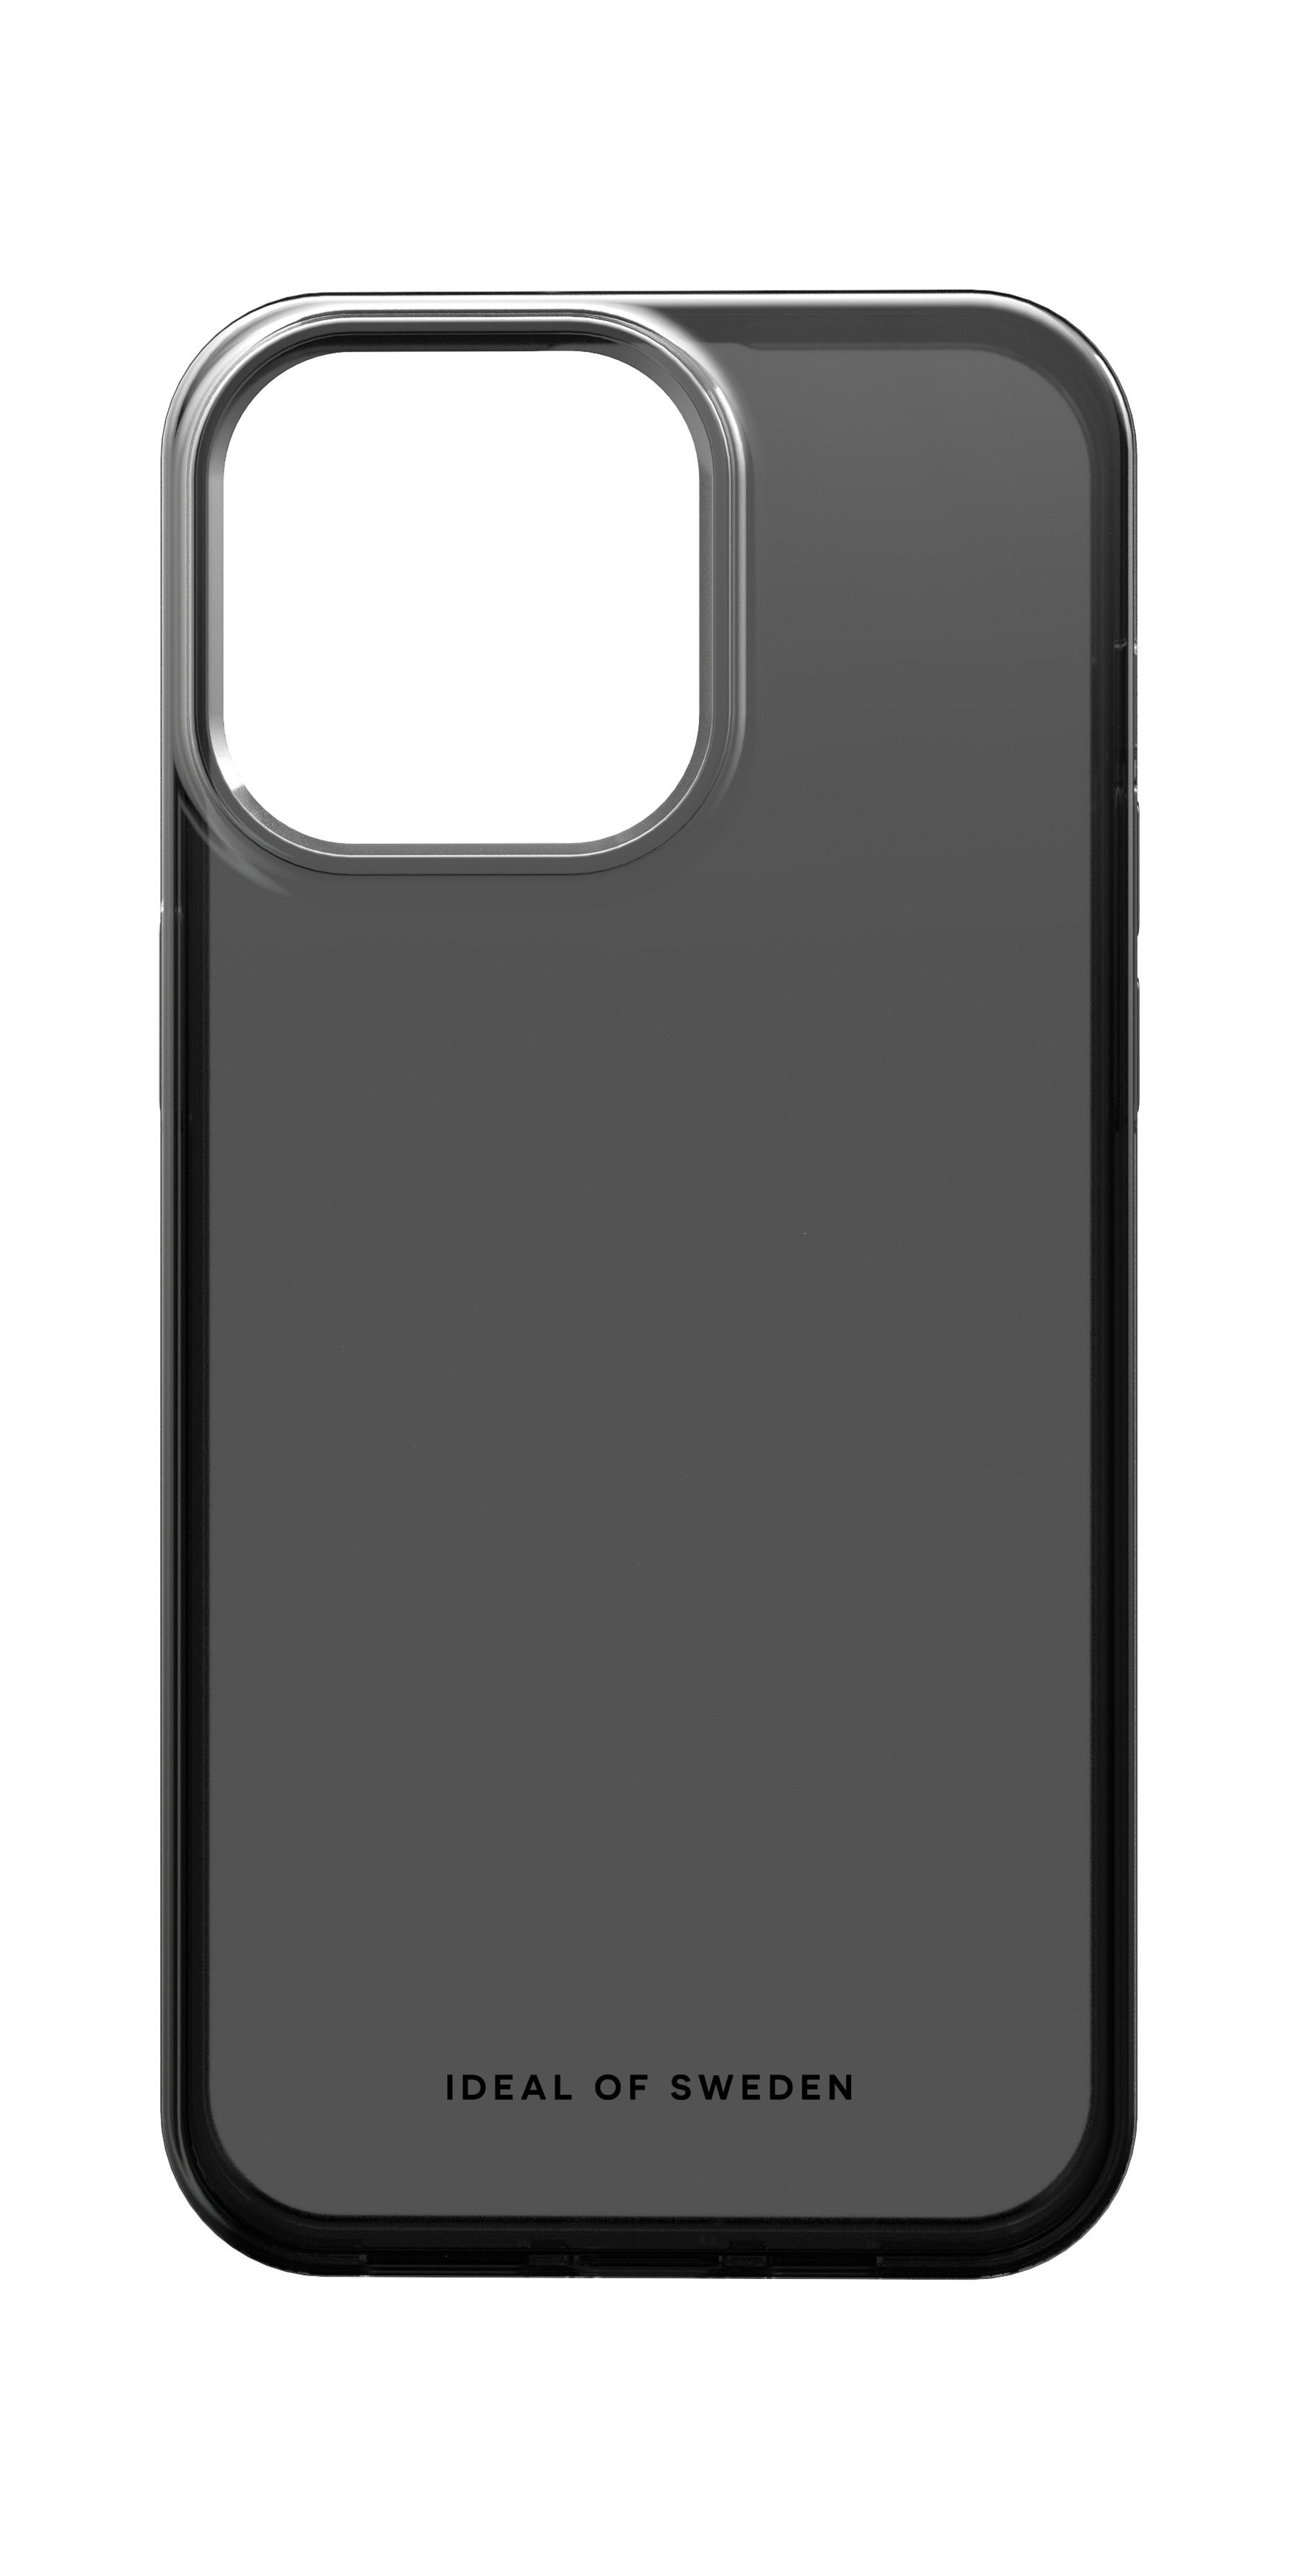 Tinted Clear Backcover, Pro Case, iPhone OF Apple, Max, IDEAL Black SWEDEN 15